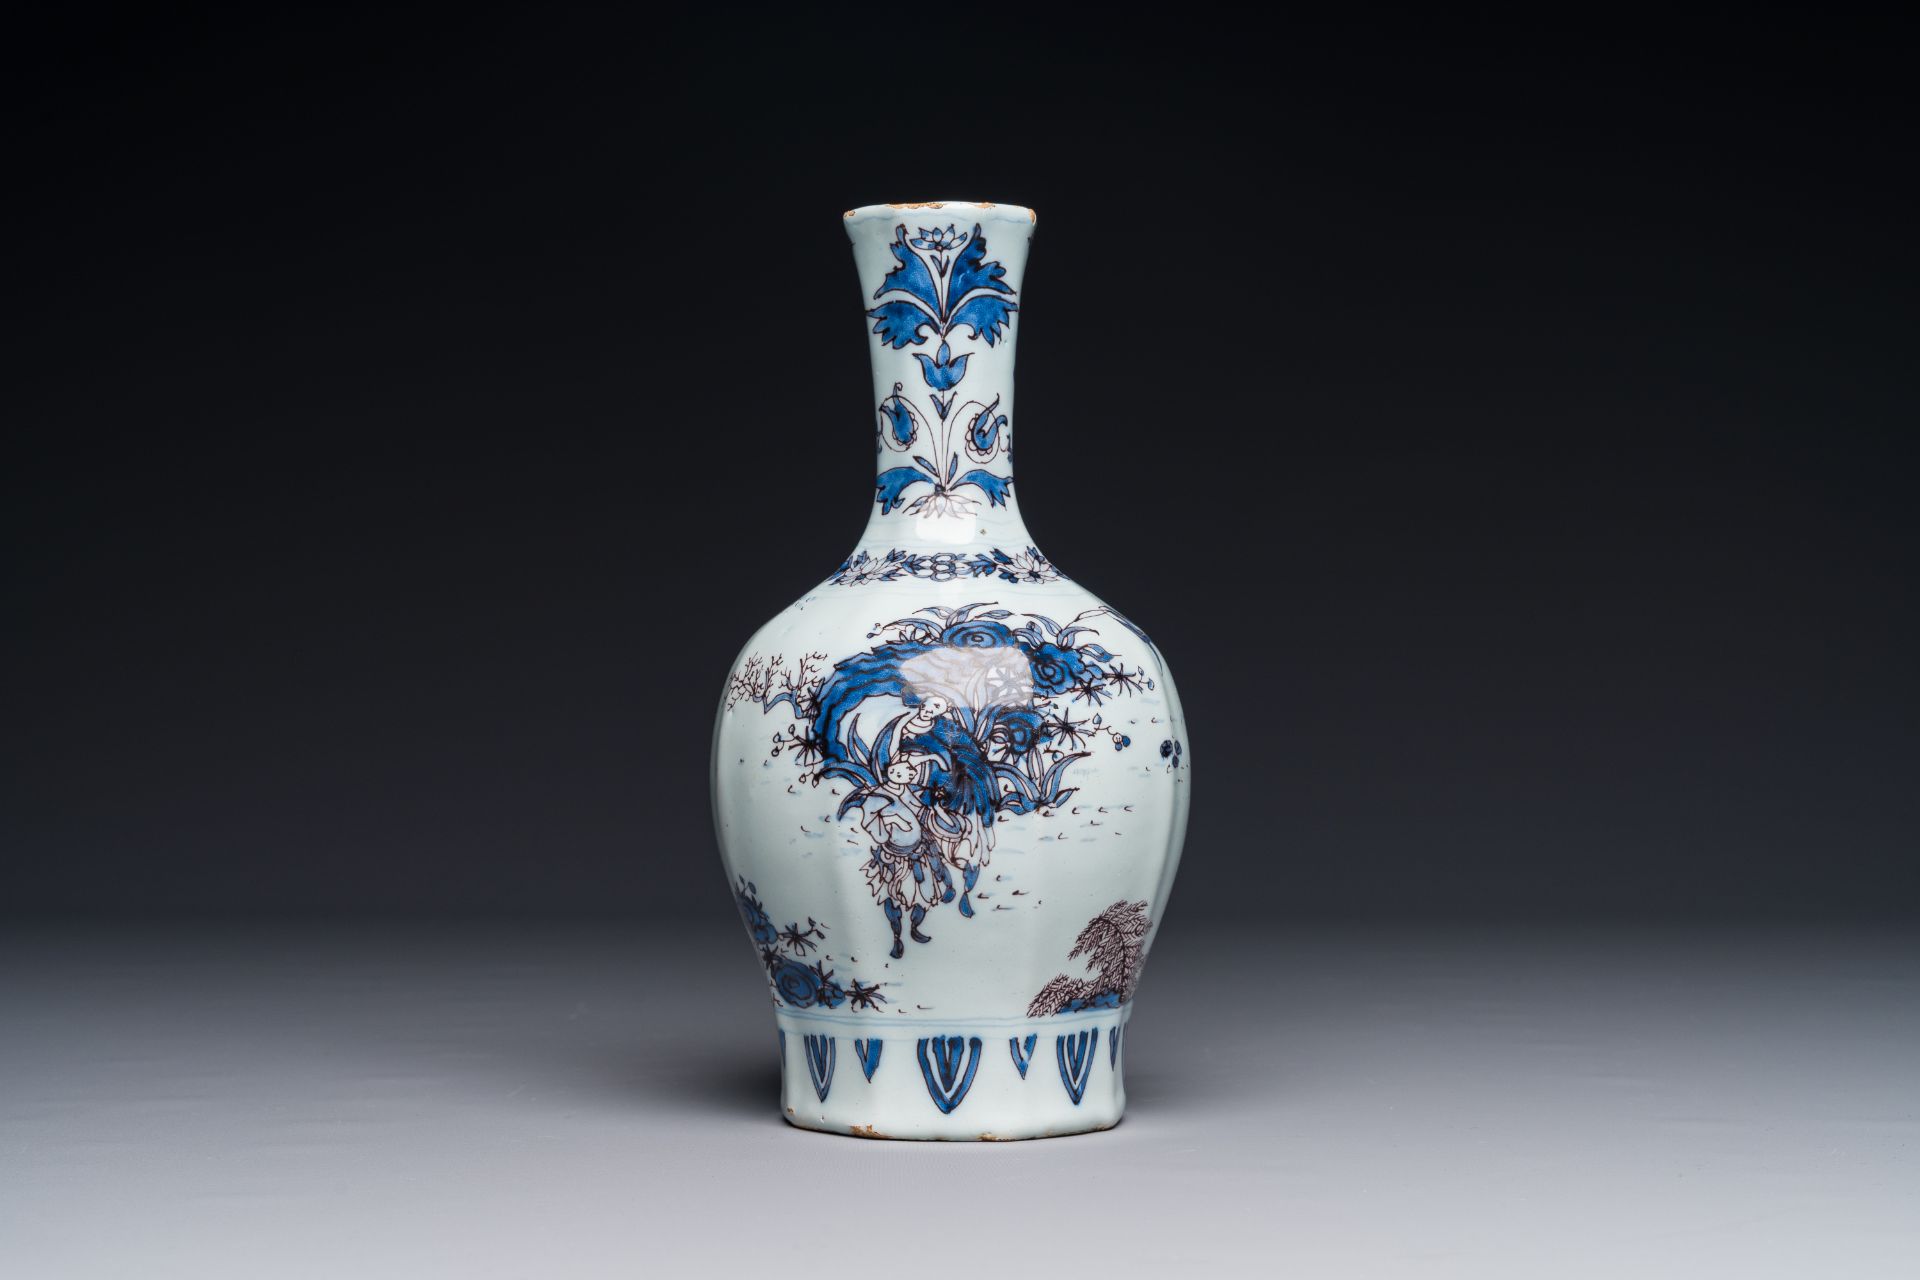 A fine Dutch Delft blue, white and manganese chinoiserie bottle vase, late 17th C. - Image 2 of 7